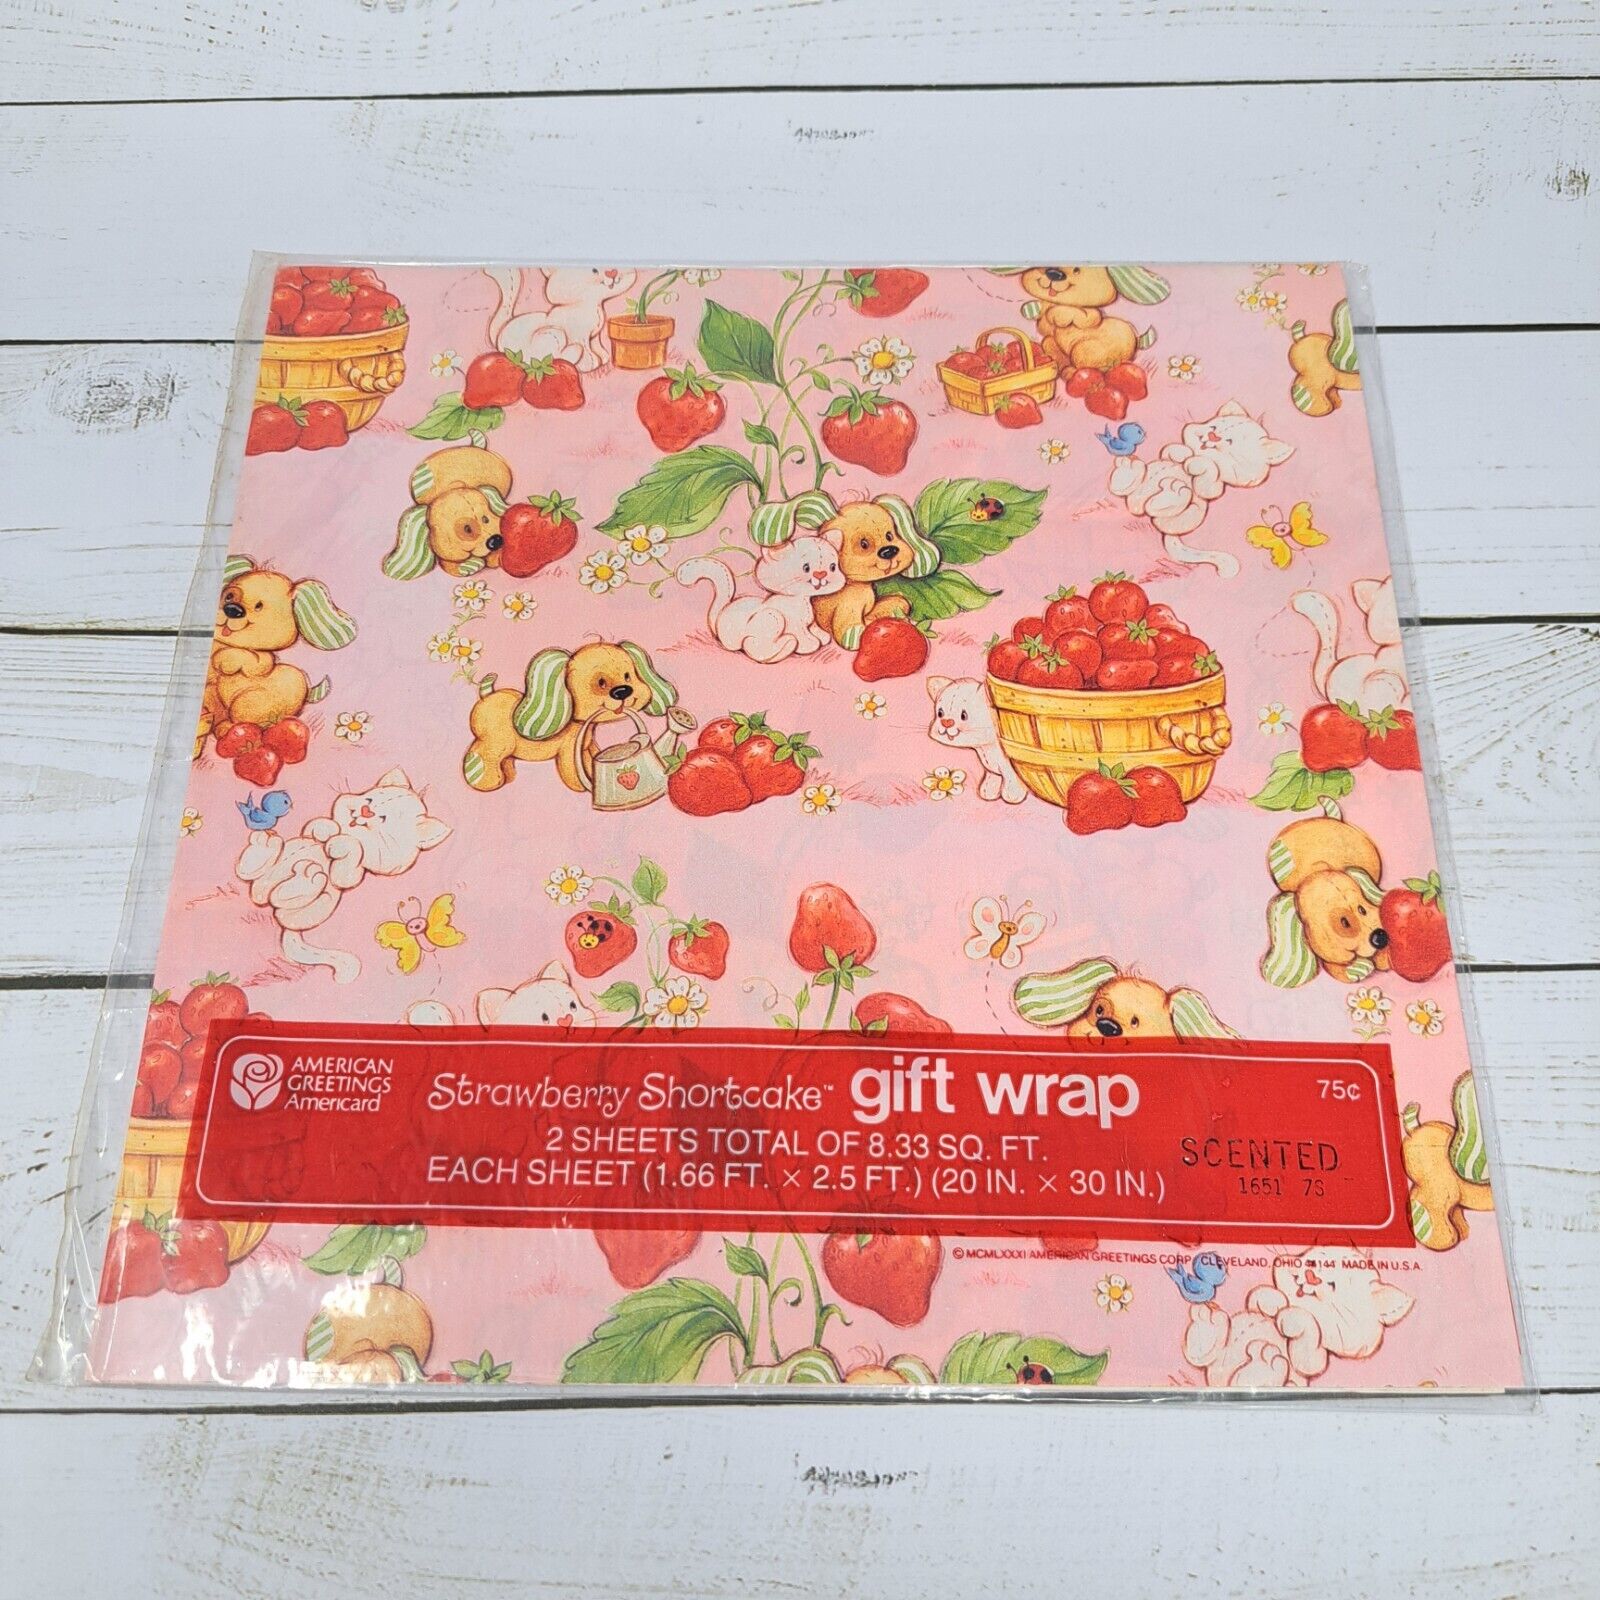 1981 VTG Strawberry Shortcake American Greetings Scented Gift Wrap 2 Sheets Dogs